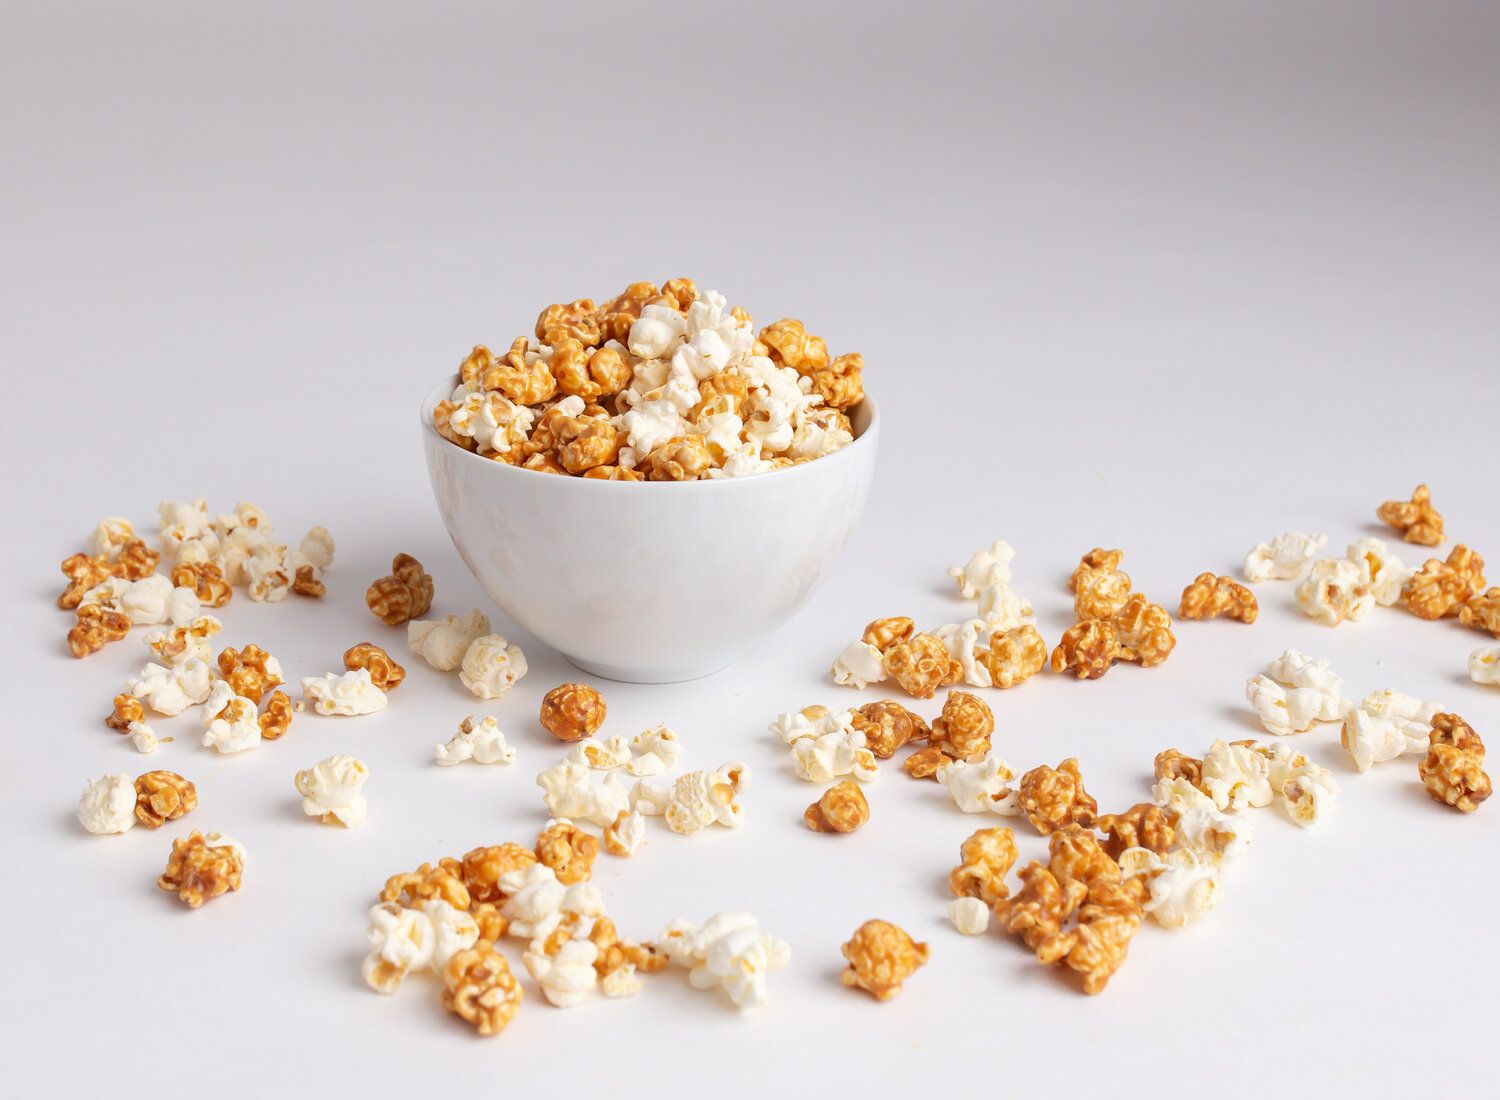 A bowl of popcorn on a white table - Popcorn